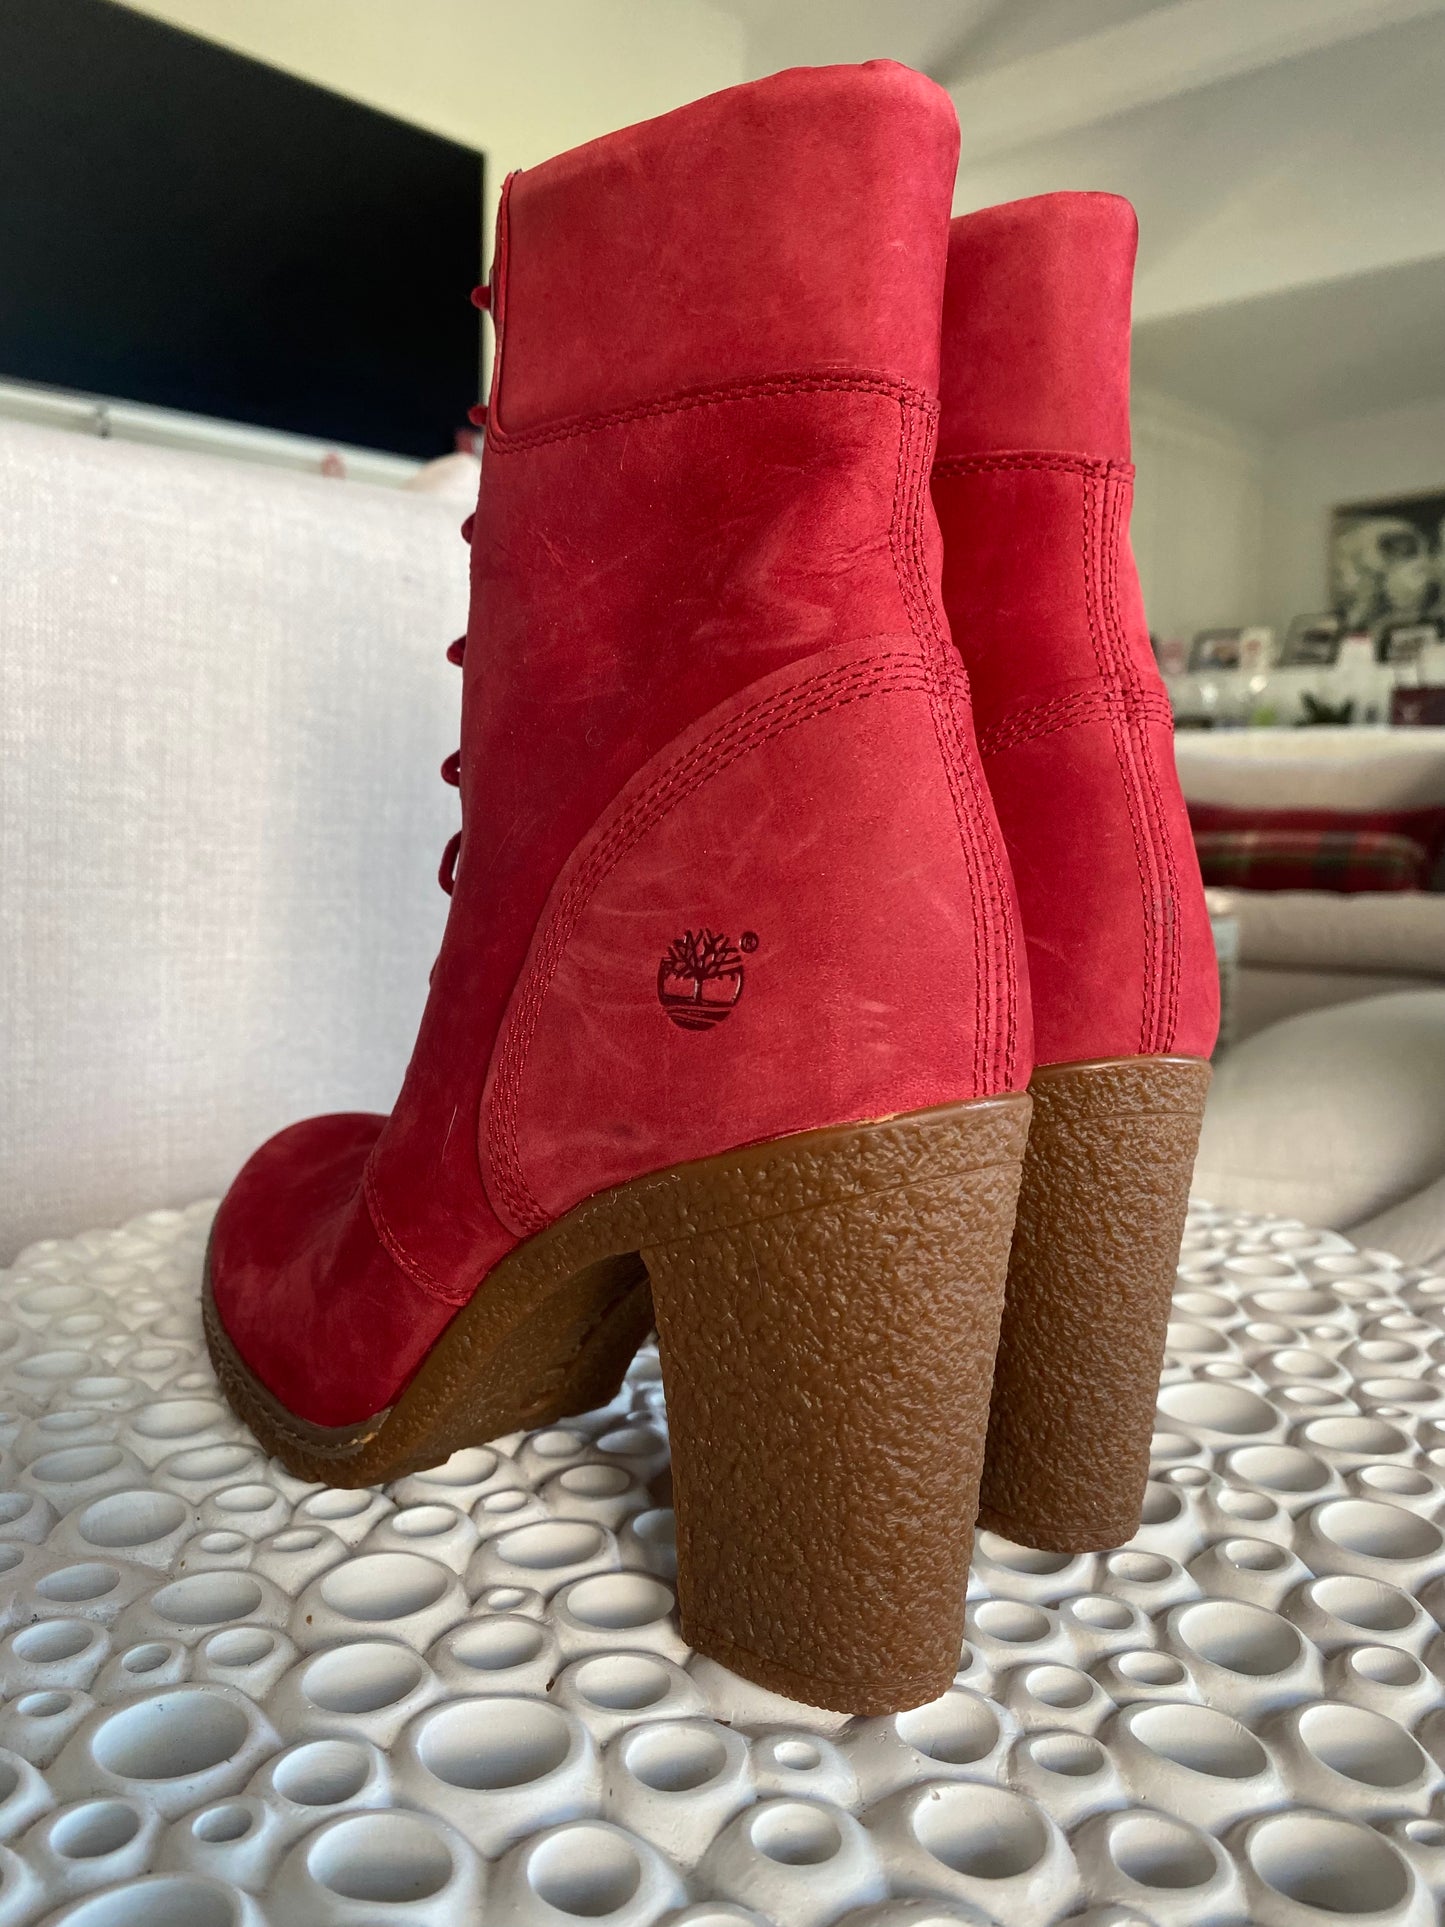 Timberland Women's Limited Ruby Red Suede Leather High Heel Boots - 10